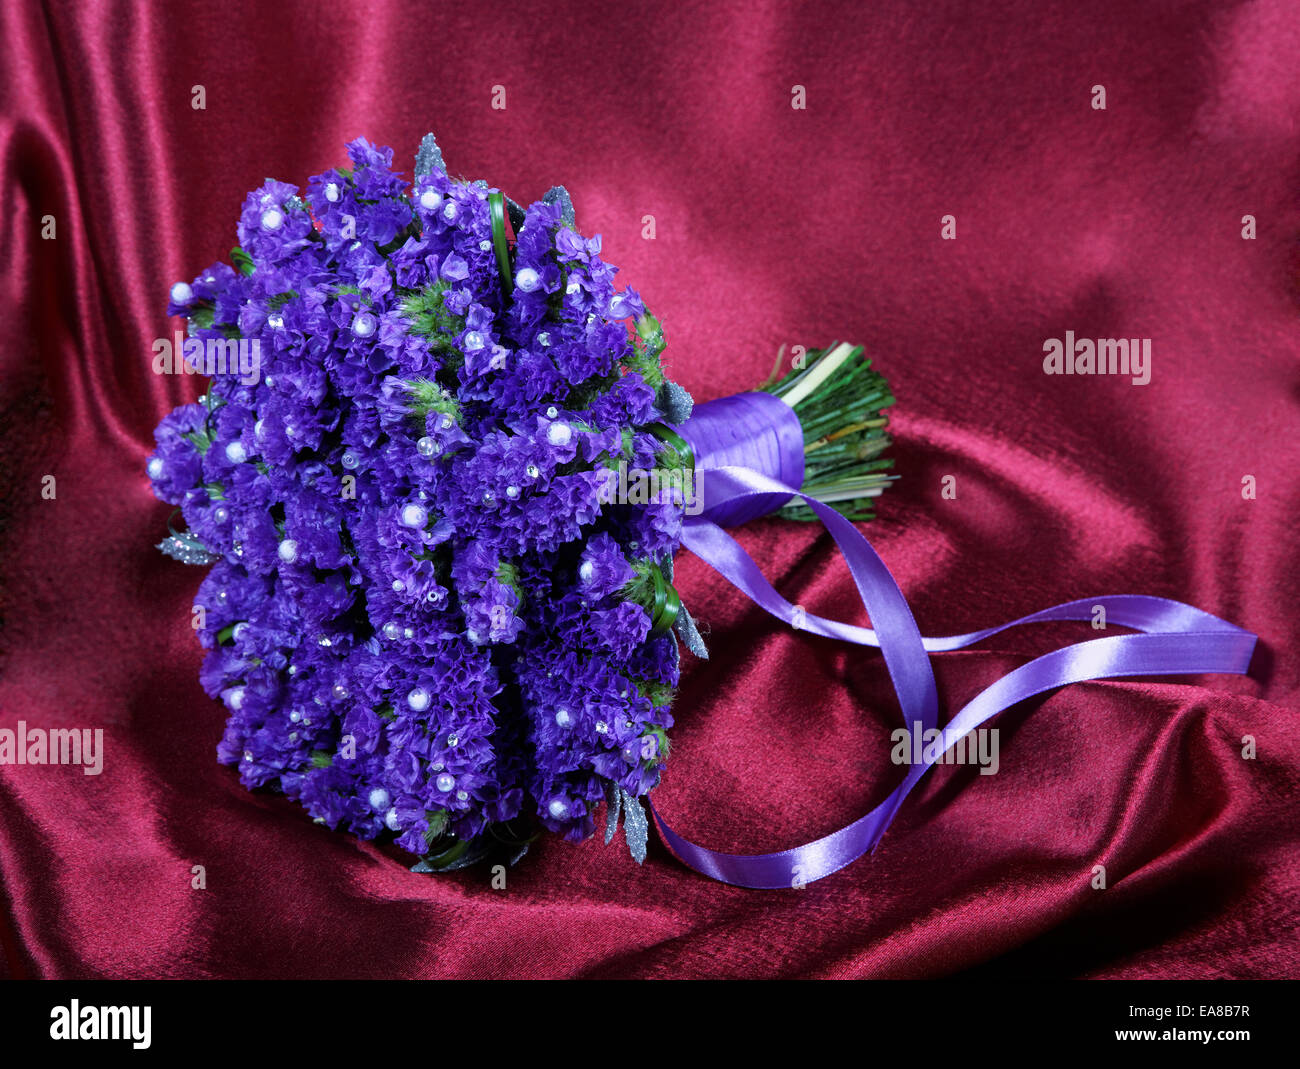 Wedding bouquet from violets on a red fabric Stock Photo